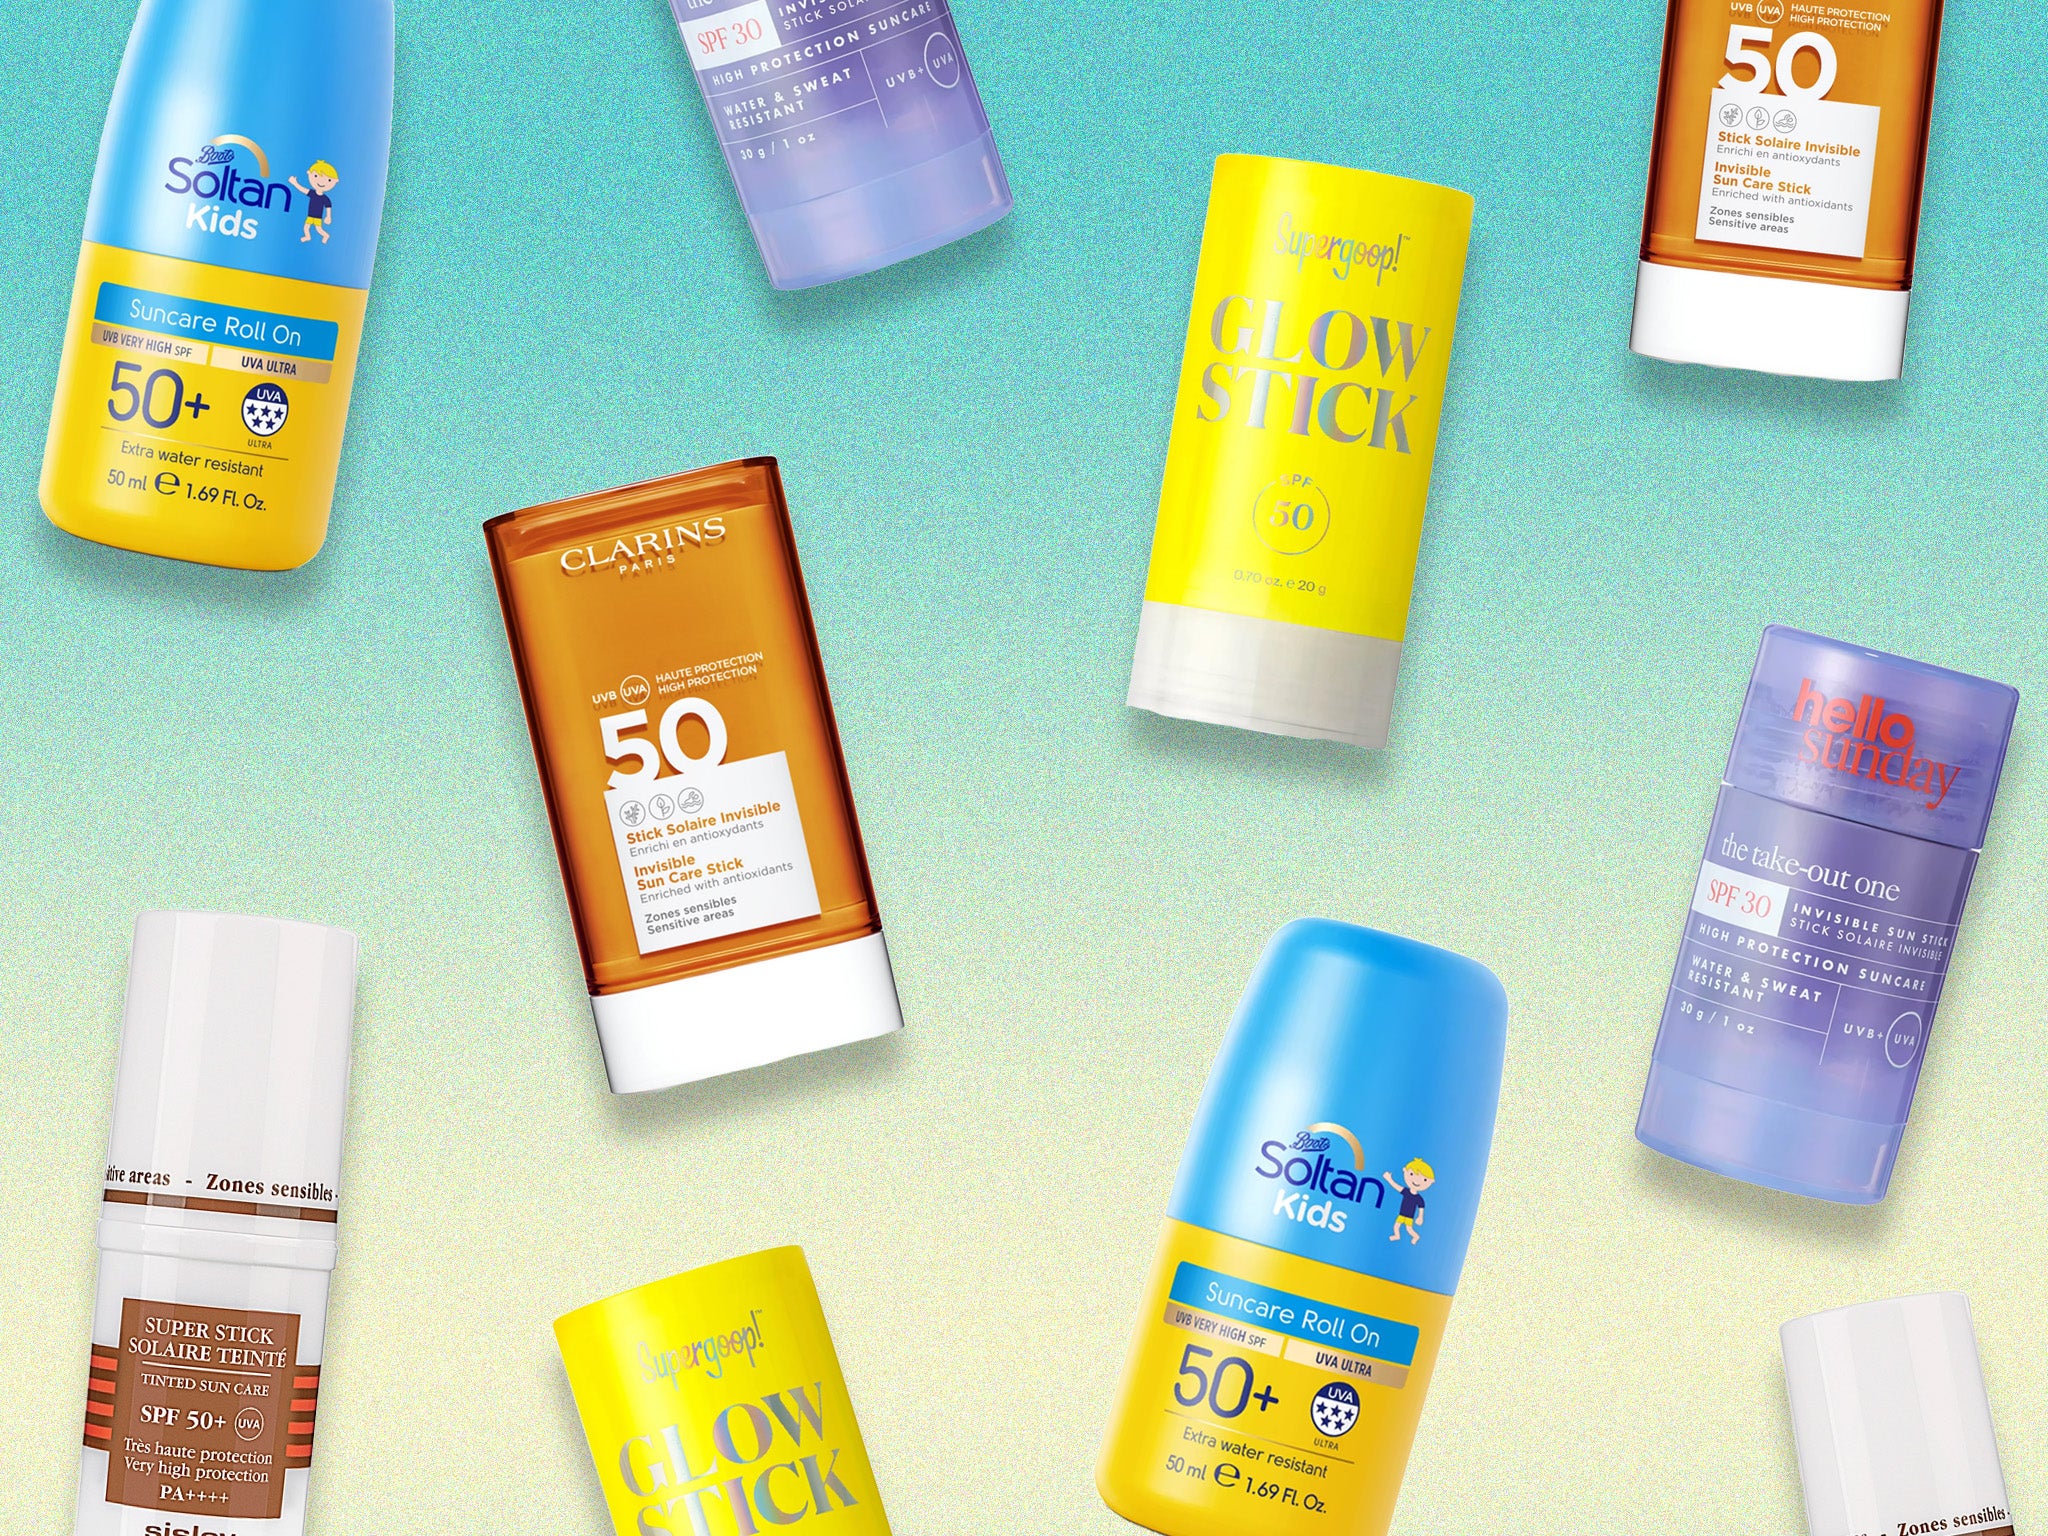 LIST: 7 Sunscreen Sticks Available in the Philippines